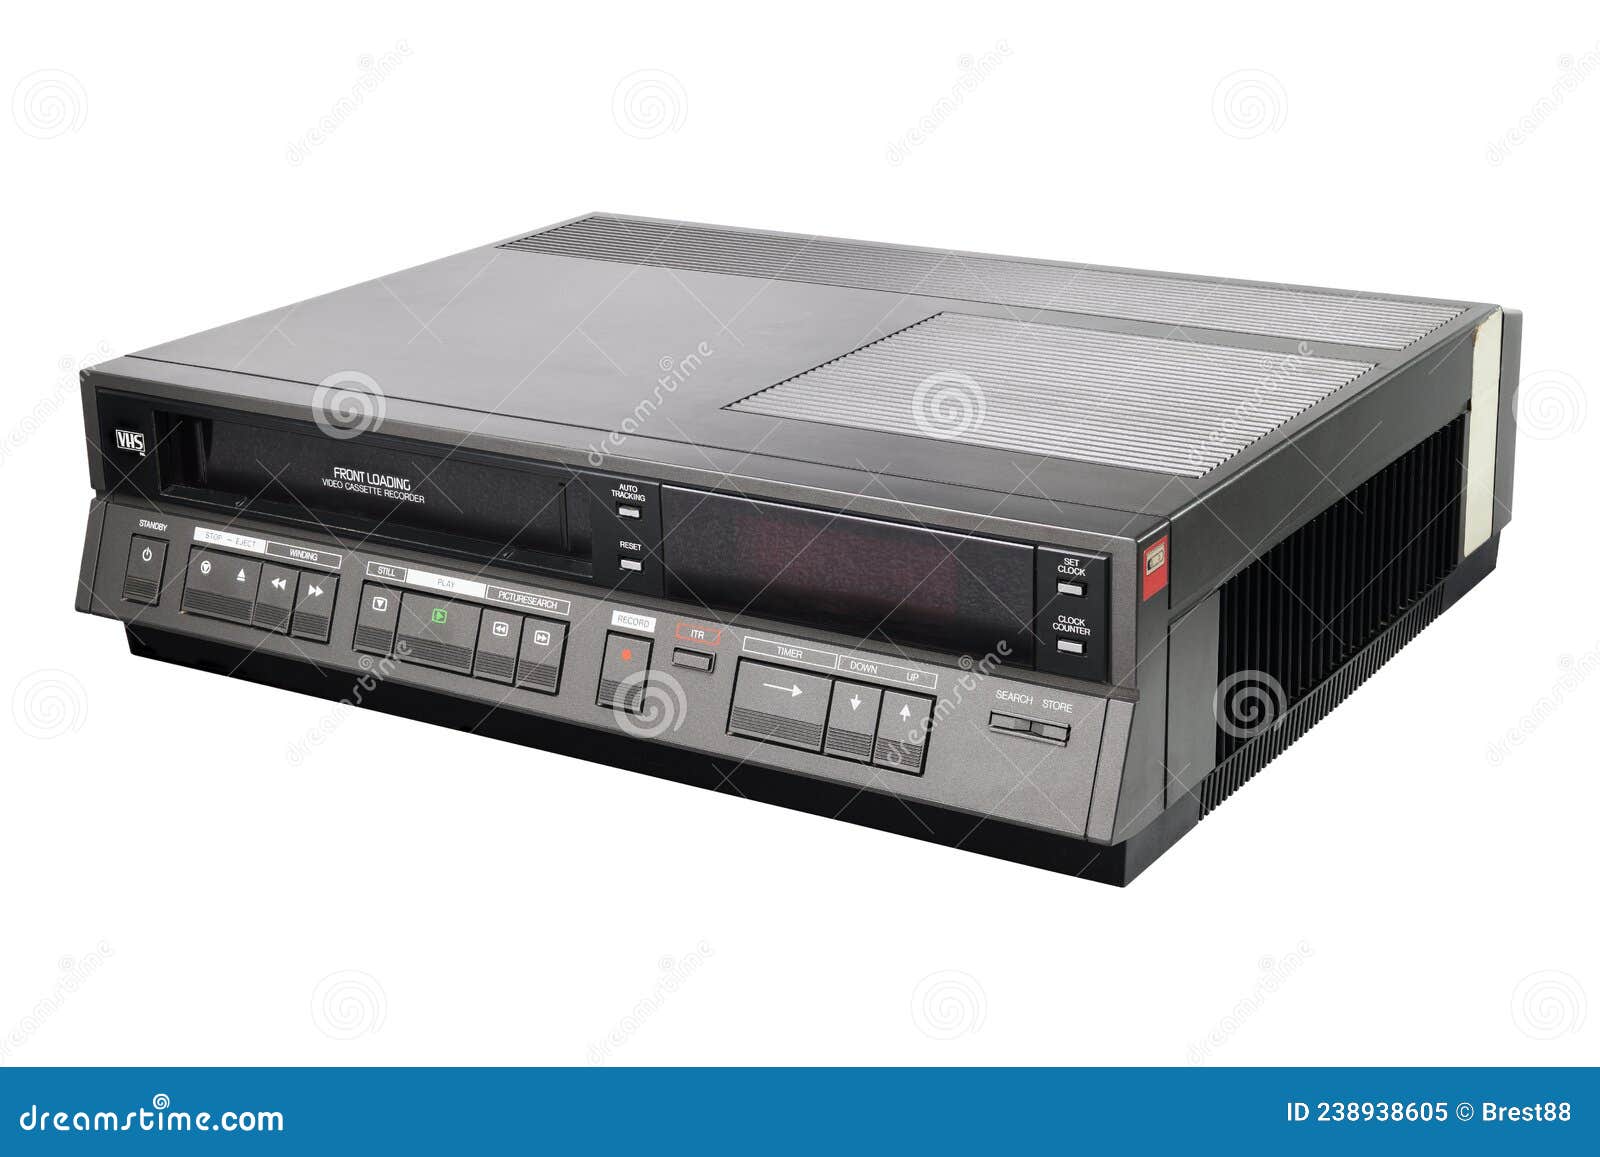 old video recorder 1980s 1990s  on white background. front view